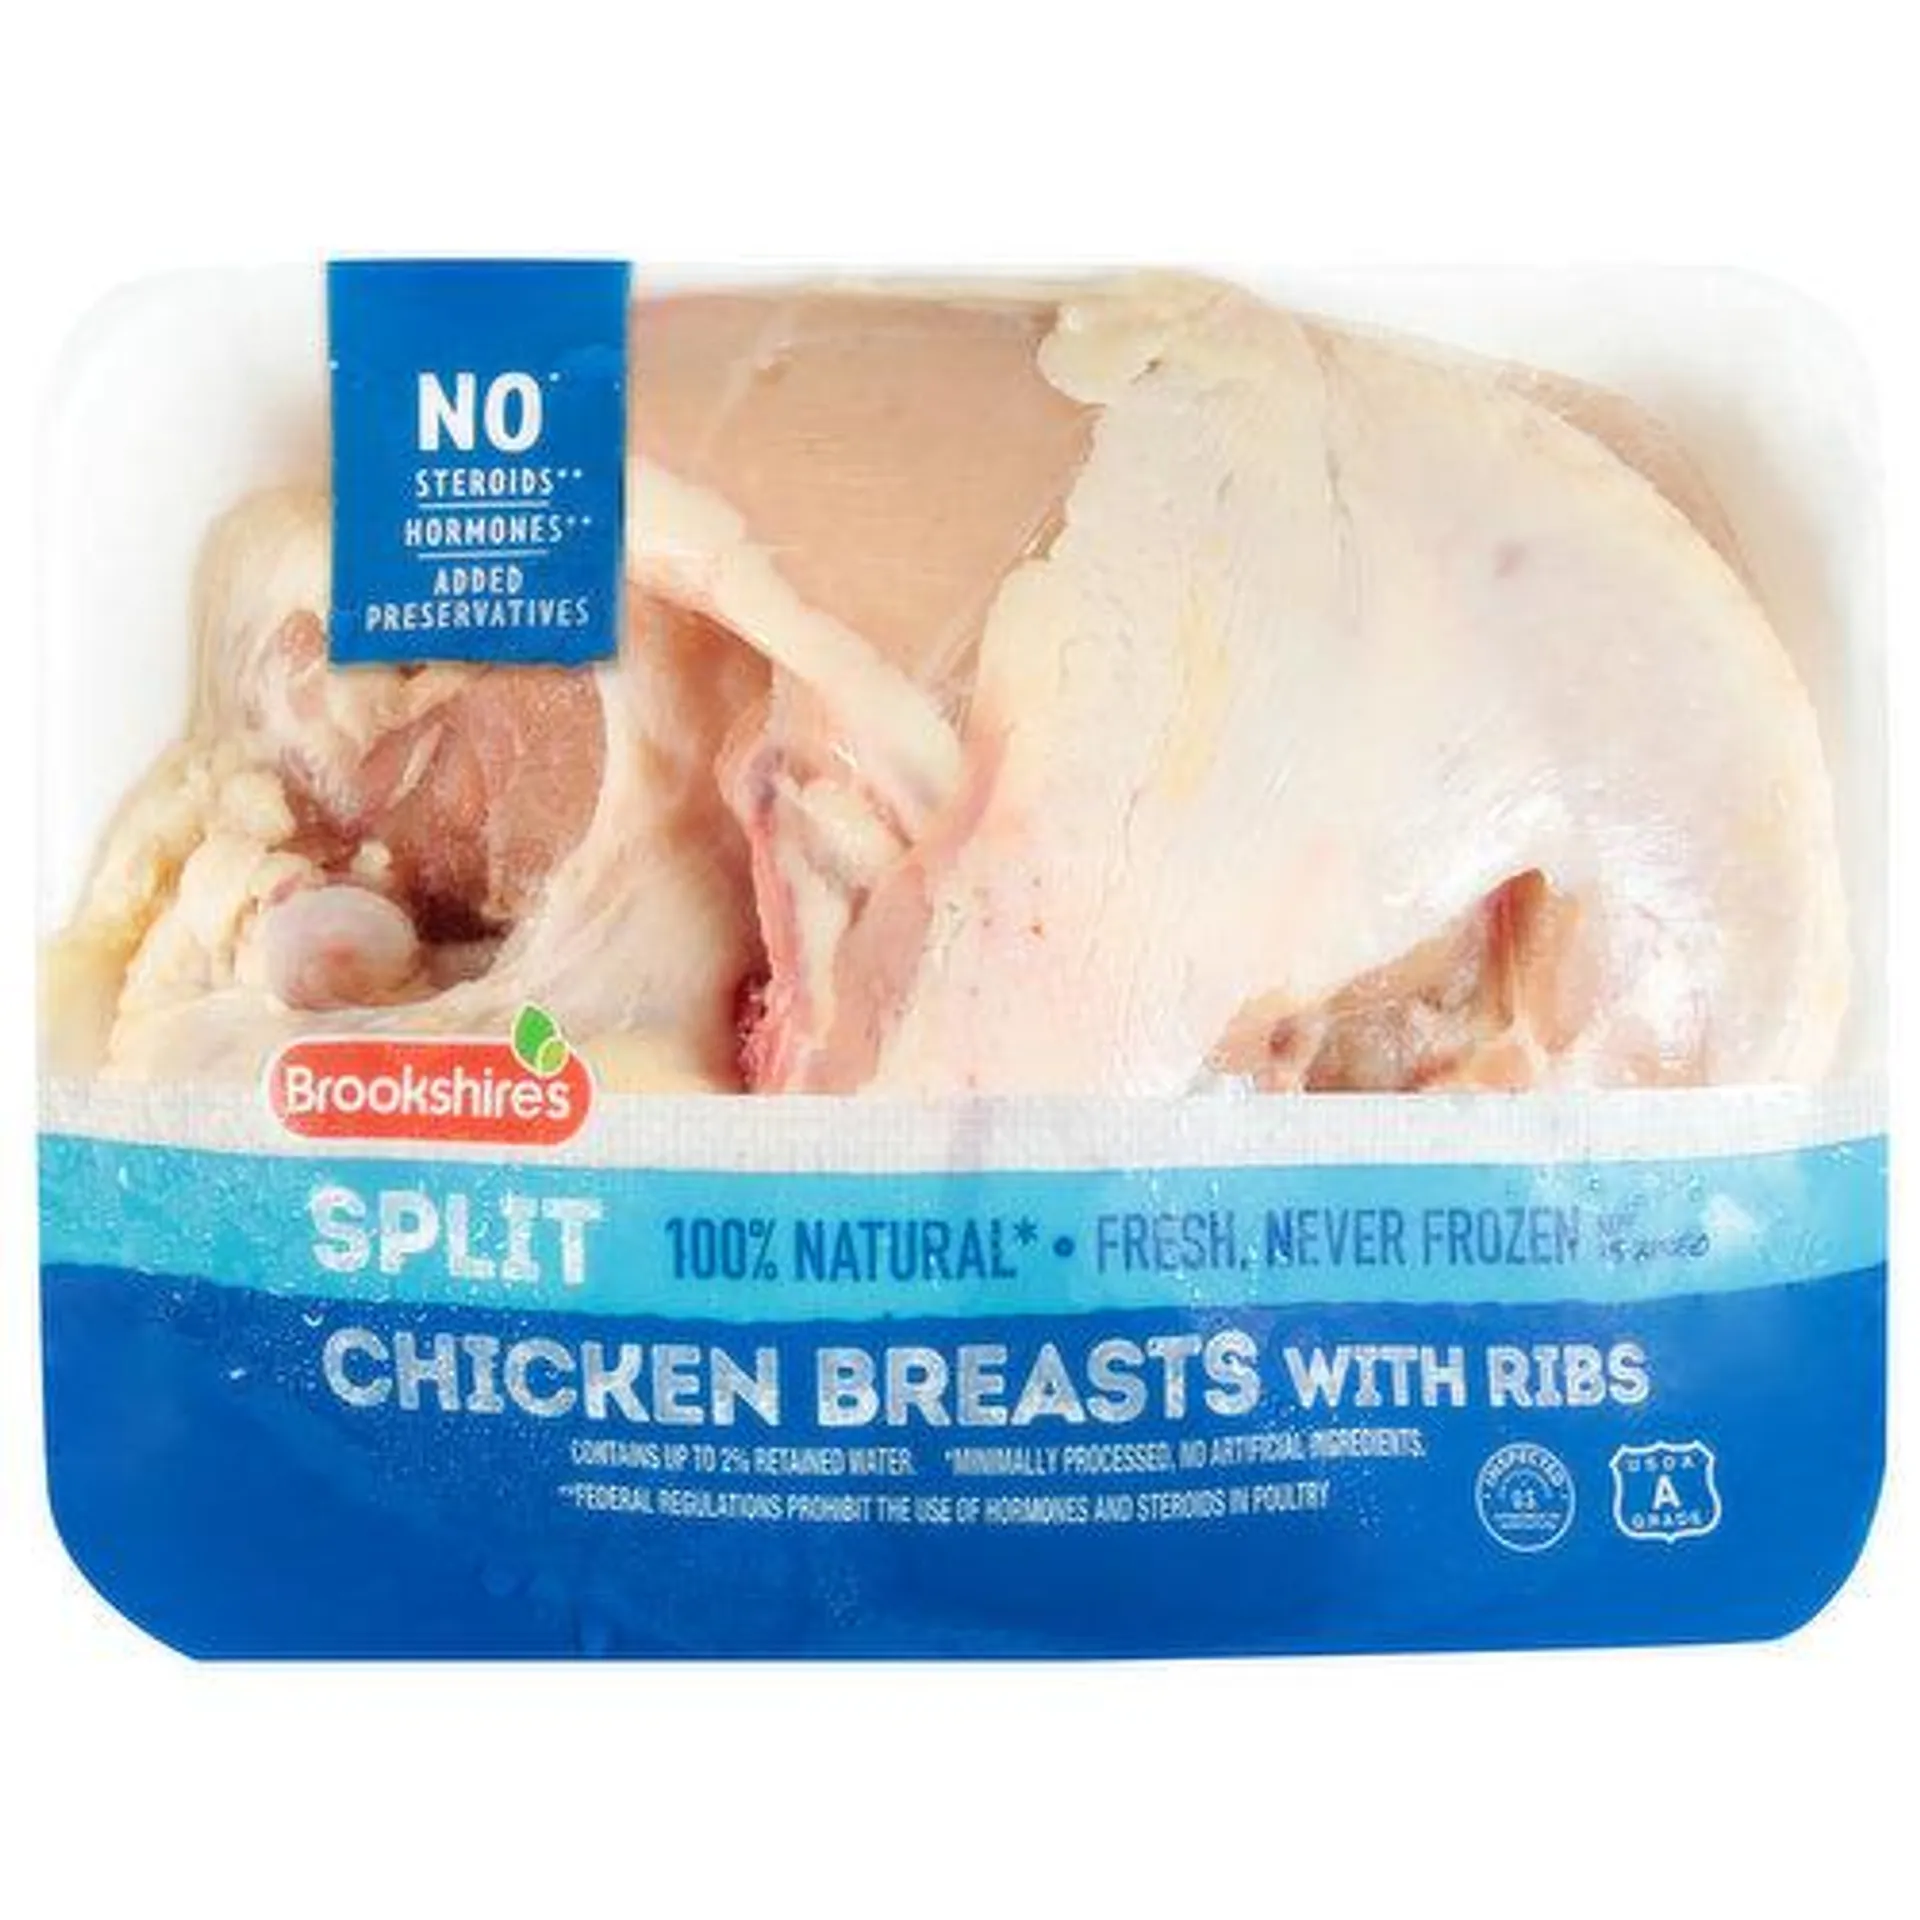 Brookshire's Chicken Breasts with Ribs, Split - 2.39 Pound